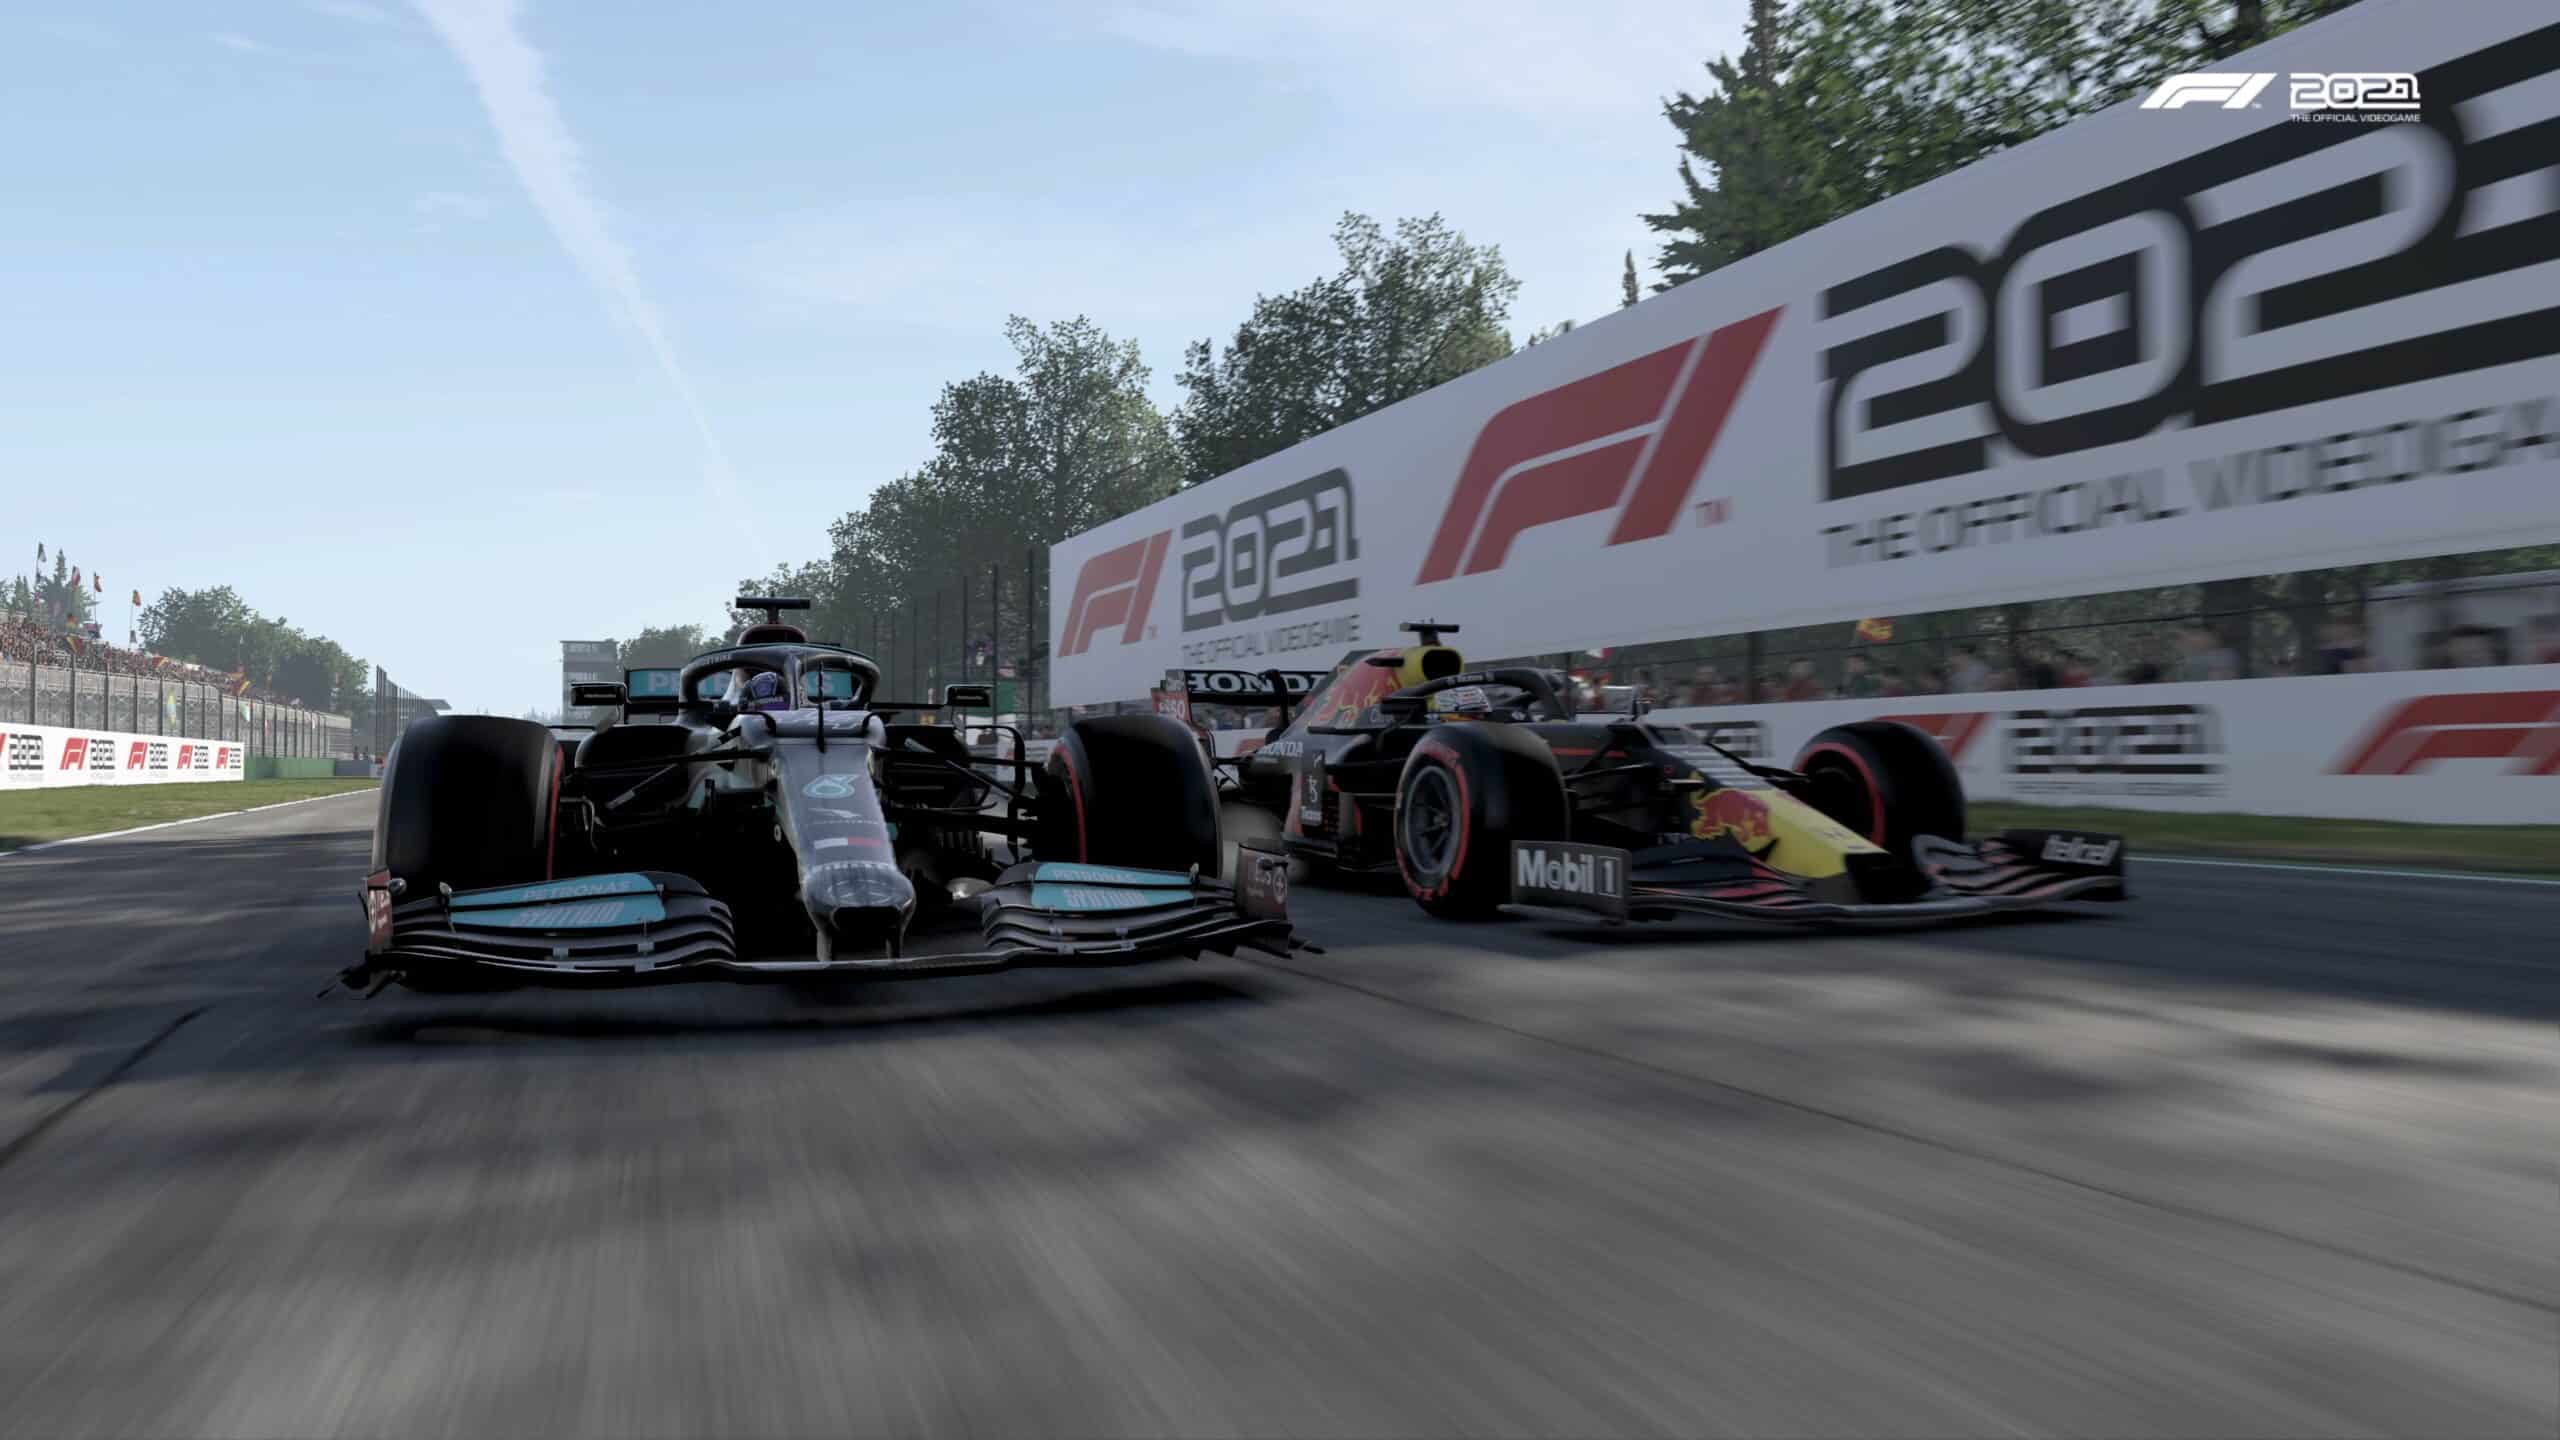 F1 2021 game driver ratings updated, Hamilton ahead of Verstappen